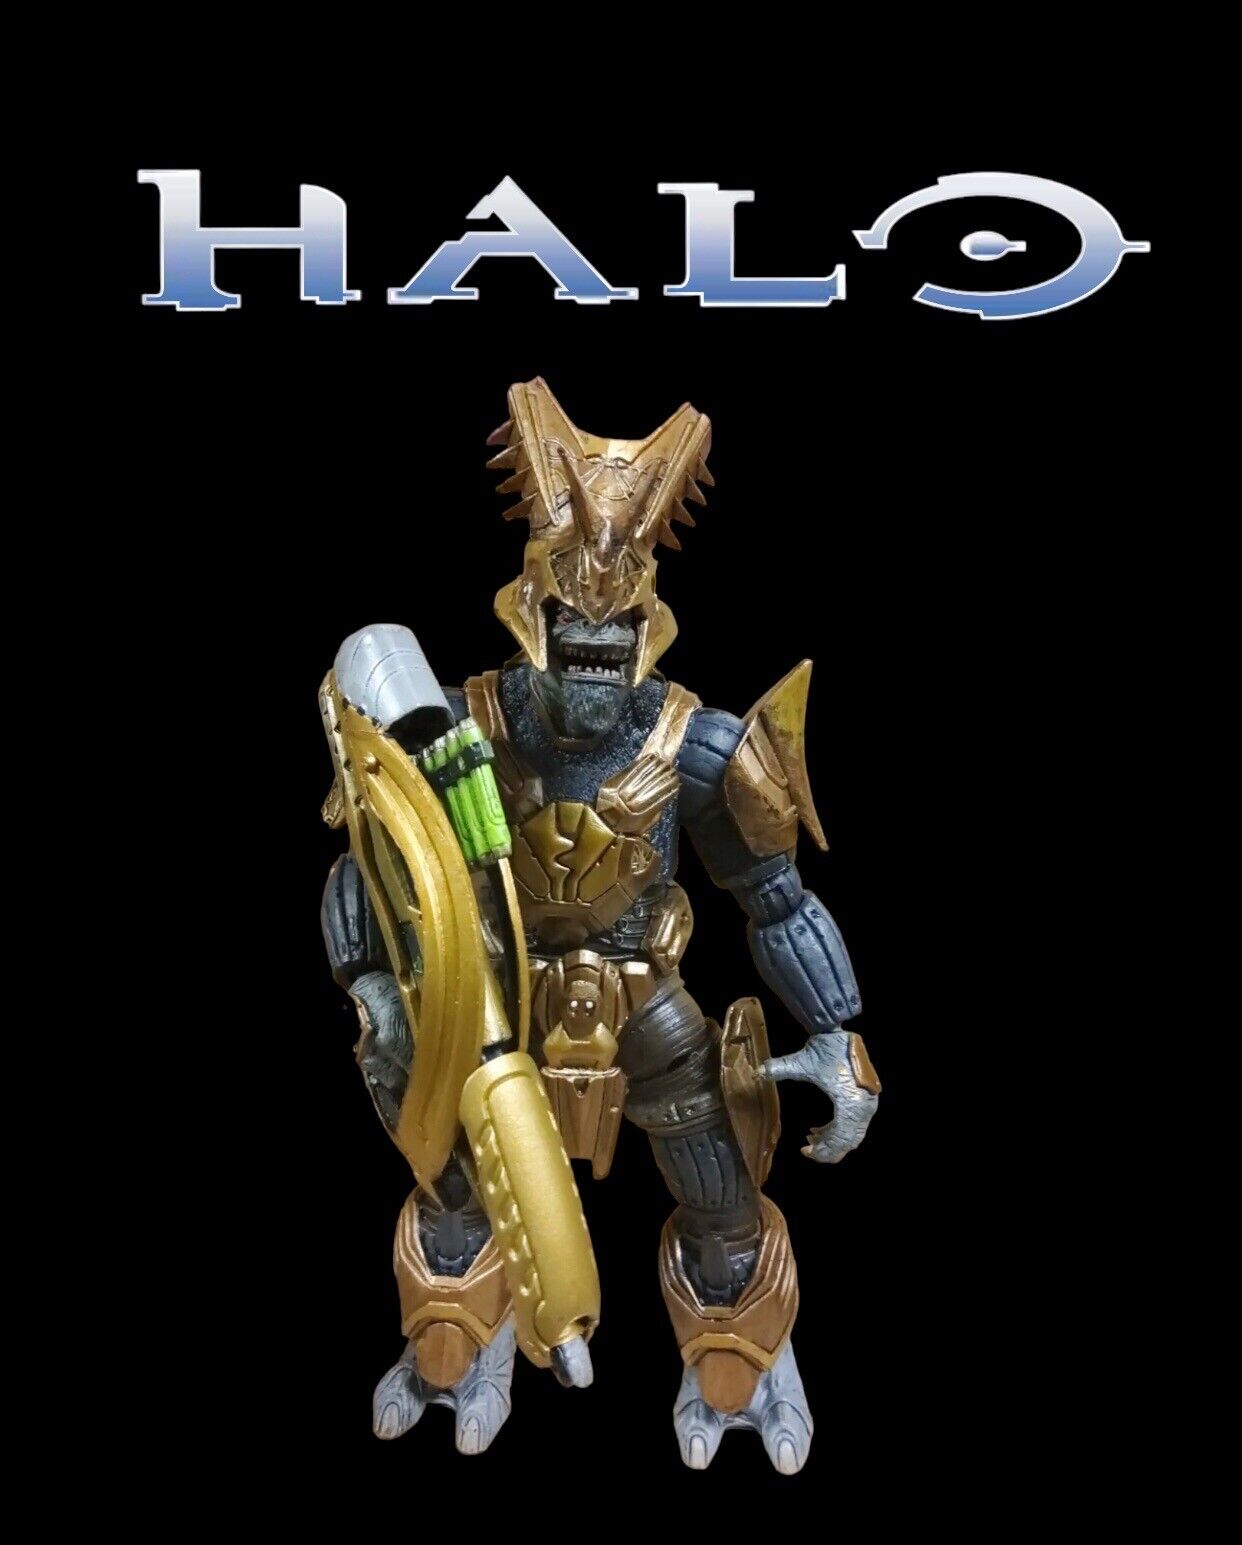 Halo 3 Covenant Brute War Chieftain Chief 6.5" Action Figure Mcfarlane